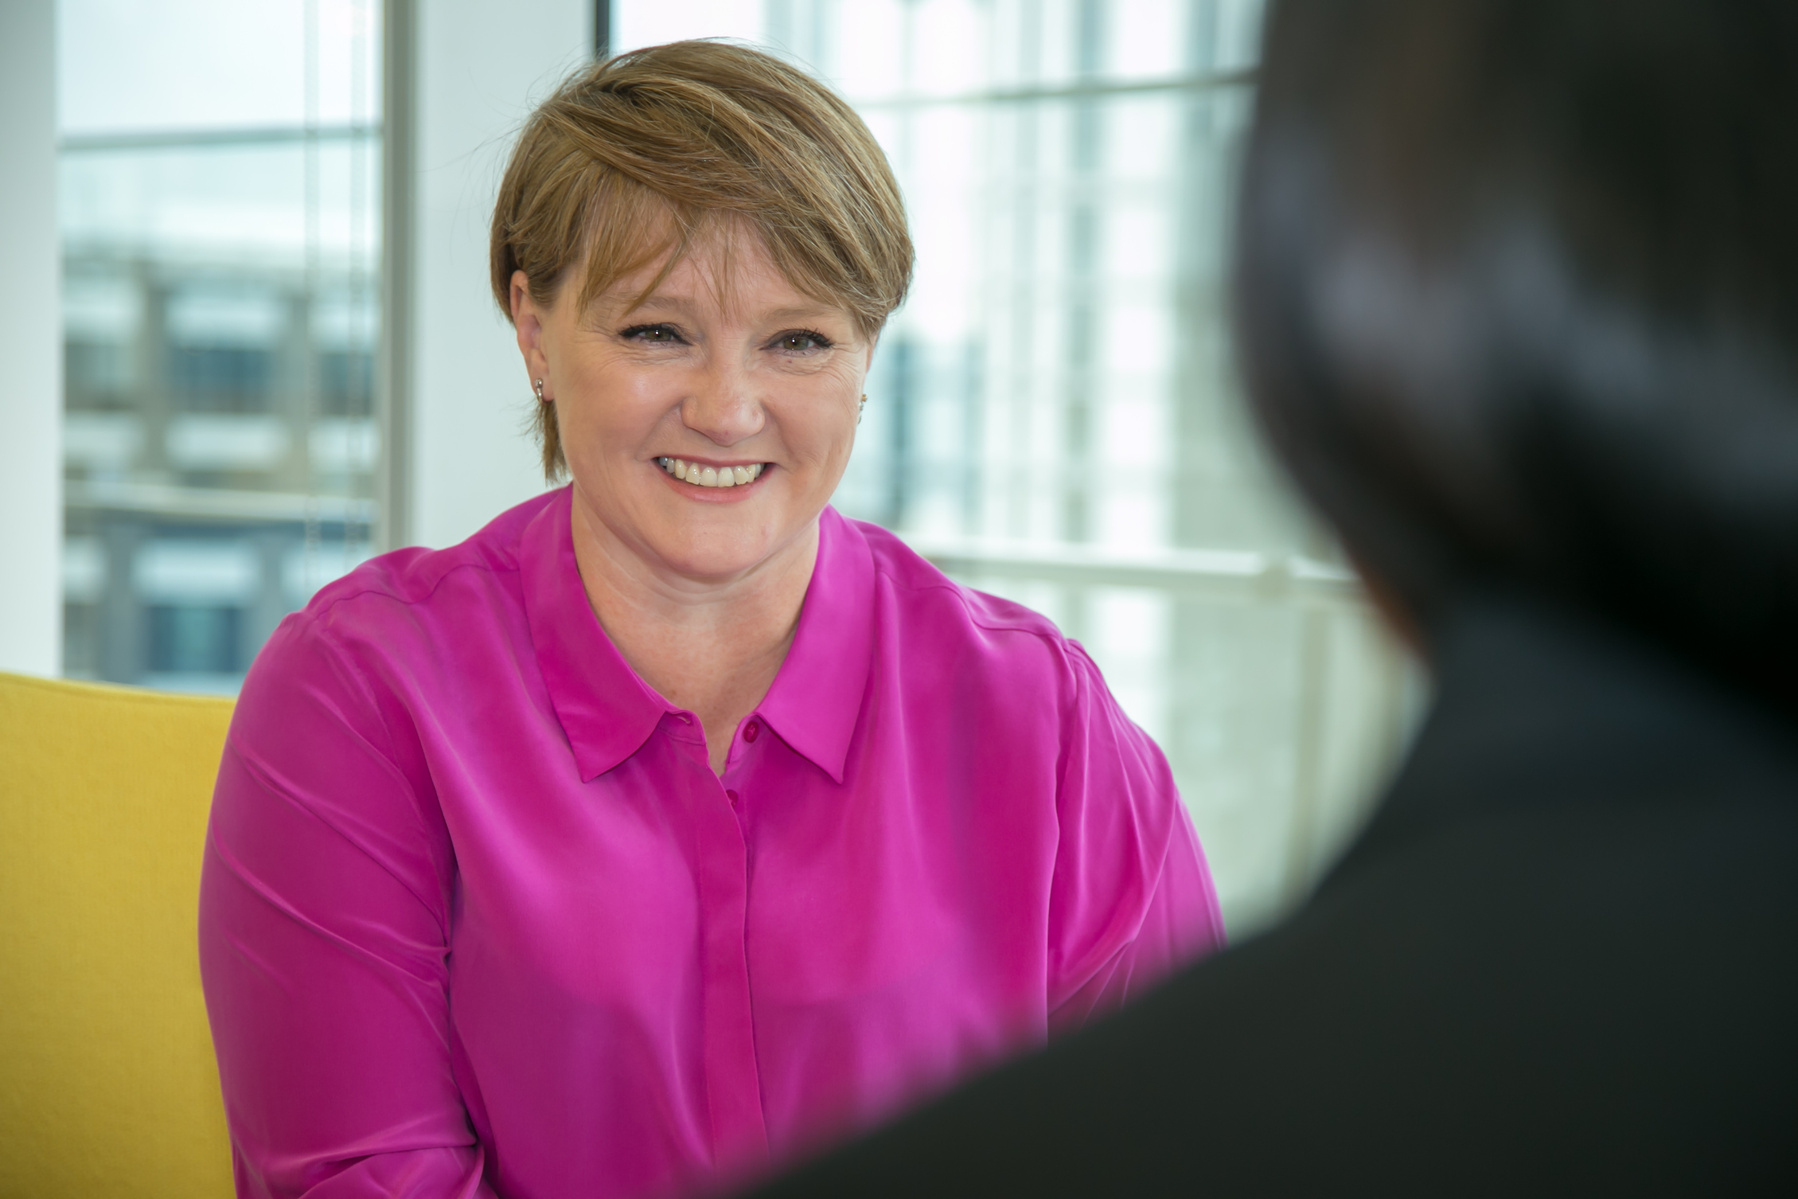 Personal Branding image of a woman wearing a pink top in an office talking to a client